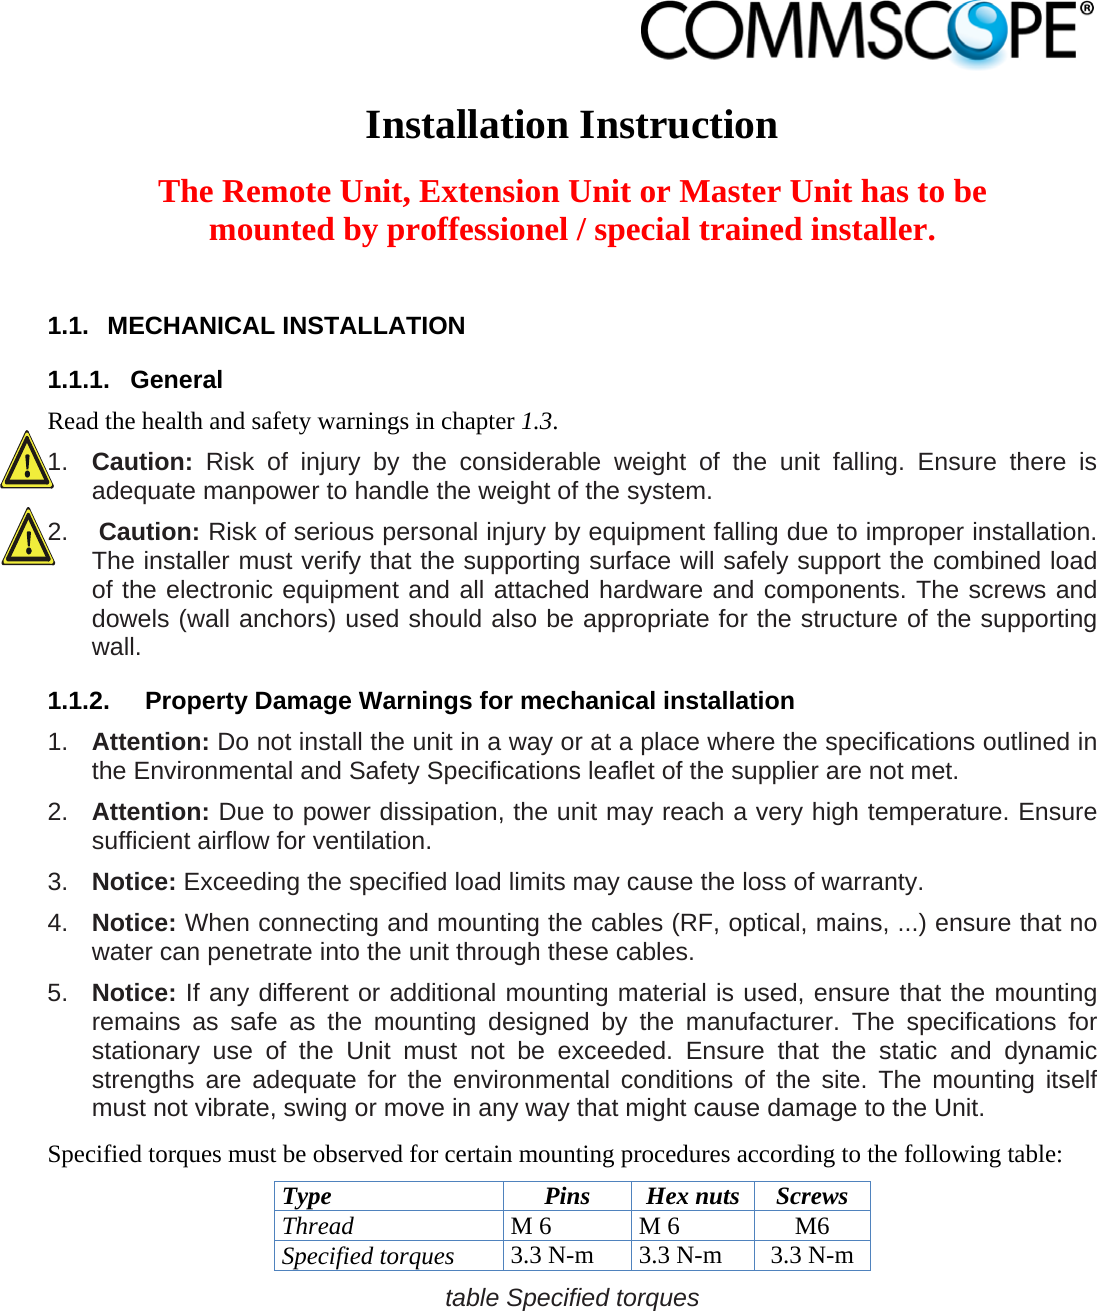                             Installation Instruction  The Remote Unit, Extension Unit or Master Unit has to be mounted by proffessionel / special trained installer.  1.1. MECHANICAL INSTALLATION 1.1.1. General Read the health and safety warnings in chapter 1.3. 1.  Caution:  Risk of injury by the considerable weight of the unit falling. Ensure there is adequate manpower to handle the weight of the system. 2.  Caution: Risk of serious personal injury by equipment falling due to improper installation. The installer must verify that the supporting surface will safely support the combined load of the electronic equipment and all attached hardware and components. The screws and dowels (wall anchors) used should also be appropriate for the structure of the supporting wall. 1.1.2.  Property Damage Warnings for mechanical installation 1.  Attention: Do not install the unit in a way or at a place where the specifications outlined in the Environmental and Safety Specifications leaflet of the supplier are not met. 2.  Attention: Due to power dissipation, the unit may reach a very high temperature. Ensure sufficient airflow for ventilation. 3.  Notice: Exceeding the specified load limits may cause the loss of warranty. 4.  Notice: When connecting and mounting the cables (RF, optical, mains, ...) ensure that no water can penetrate into the unit through these cables. 5.  Notice: If any different or additional mounting material is used, ensure that the mounting remains as safe as the mounting designed by the manufacturer. The specifications for stationary use of the Unit must not be exceeded. Ensure that the static and dynamic strengths are adequate for the environmental conditions of the site. The mounting itself must not vibrate, swing or move in any way that might cause damage to the Unit. Specified torques must be observed for certain mounting procedures according to the following table: Type Pins Hex nuts Screws Thread M 6  M 6  M6 Specified torques 3.3 N-m  3.3 N-m  3.3 N-m table Specified torques  